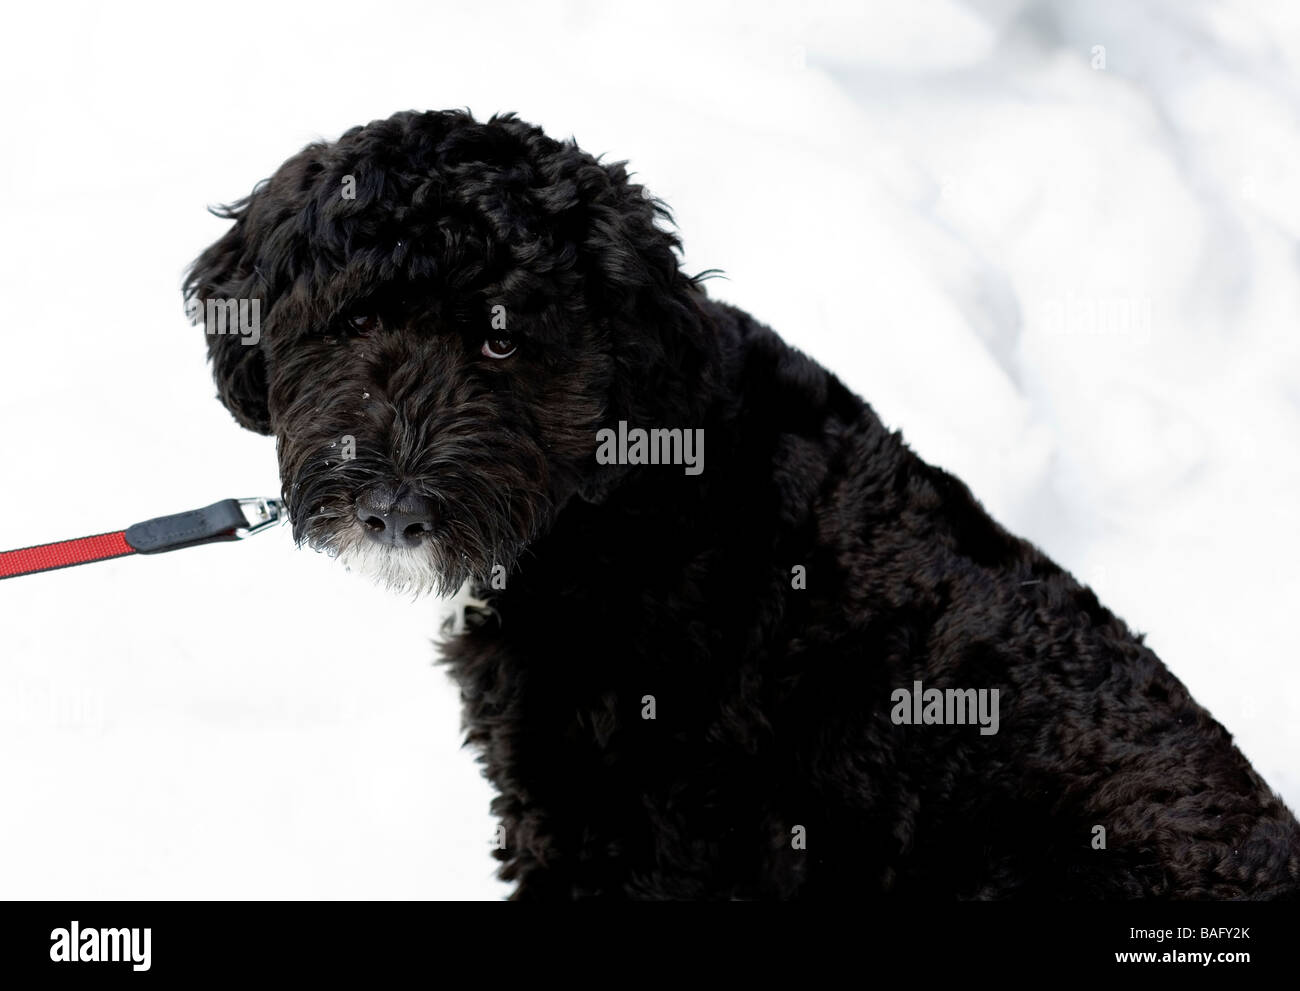 Portuguese Water Dog in the snow on a red leash. Stock Photo